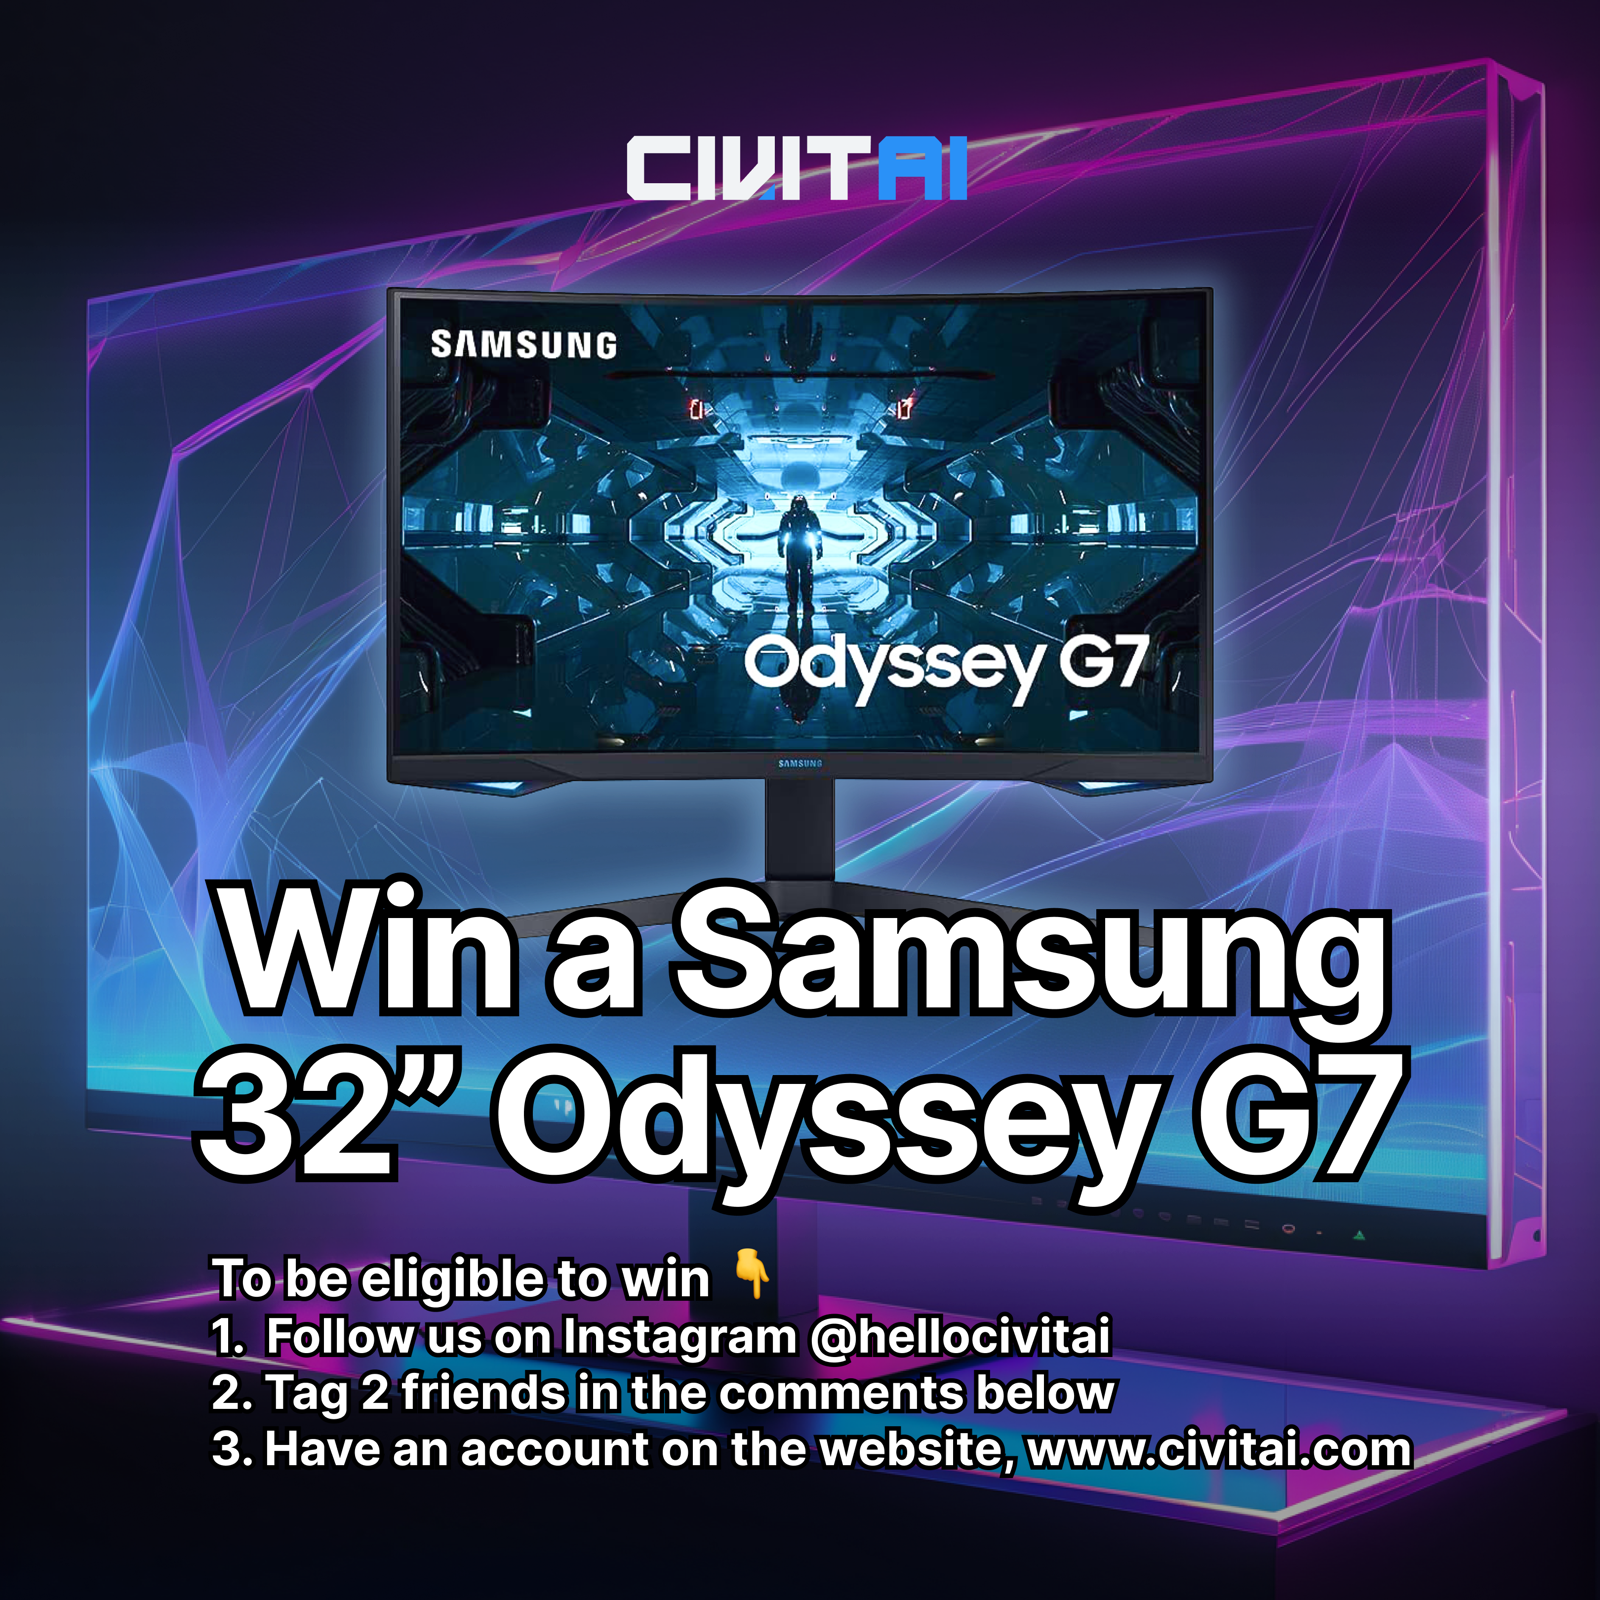 ENDED - Win a Samsung Odyssey G7 in Our “Screens & Things” Instagram Contest!